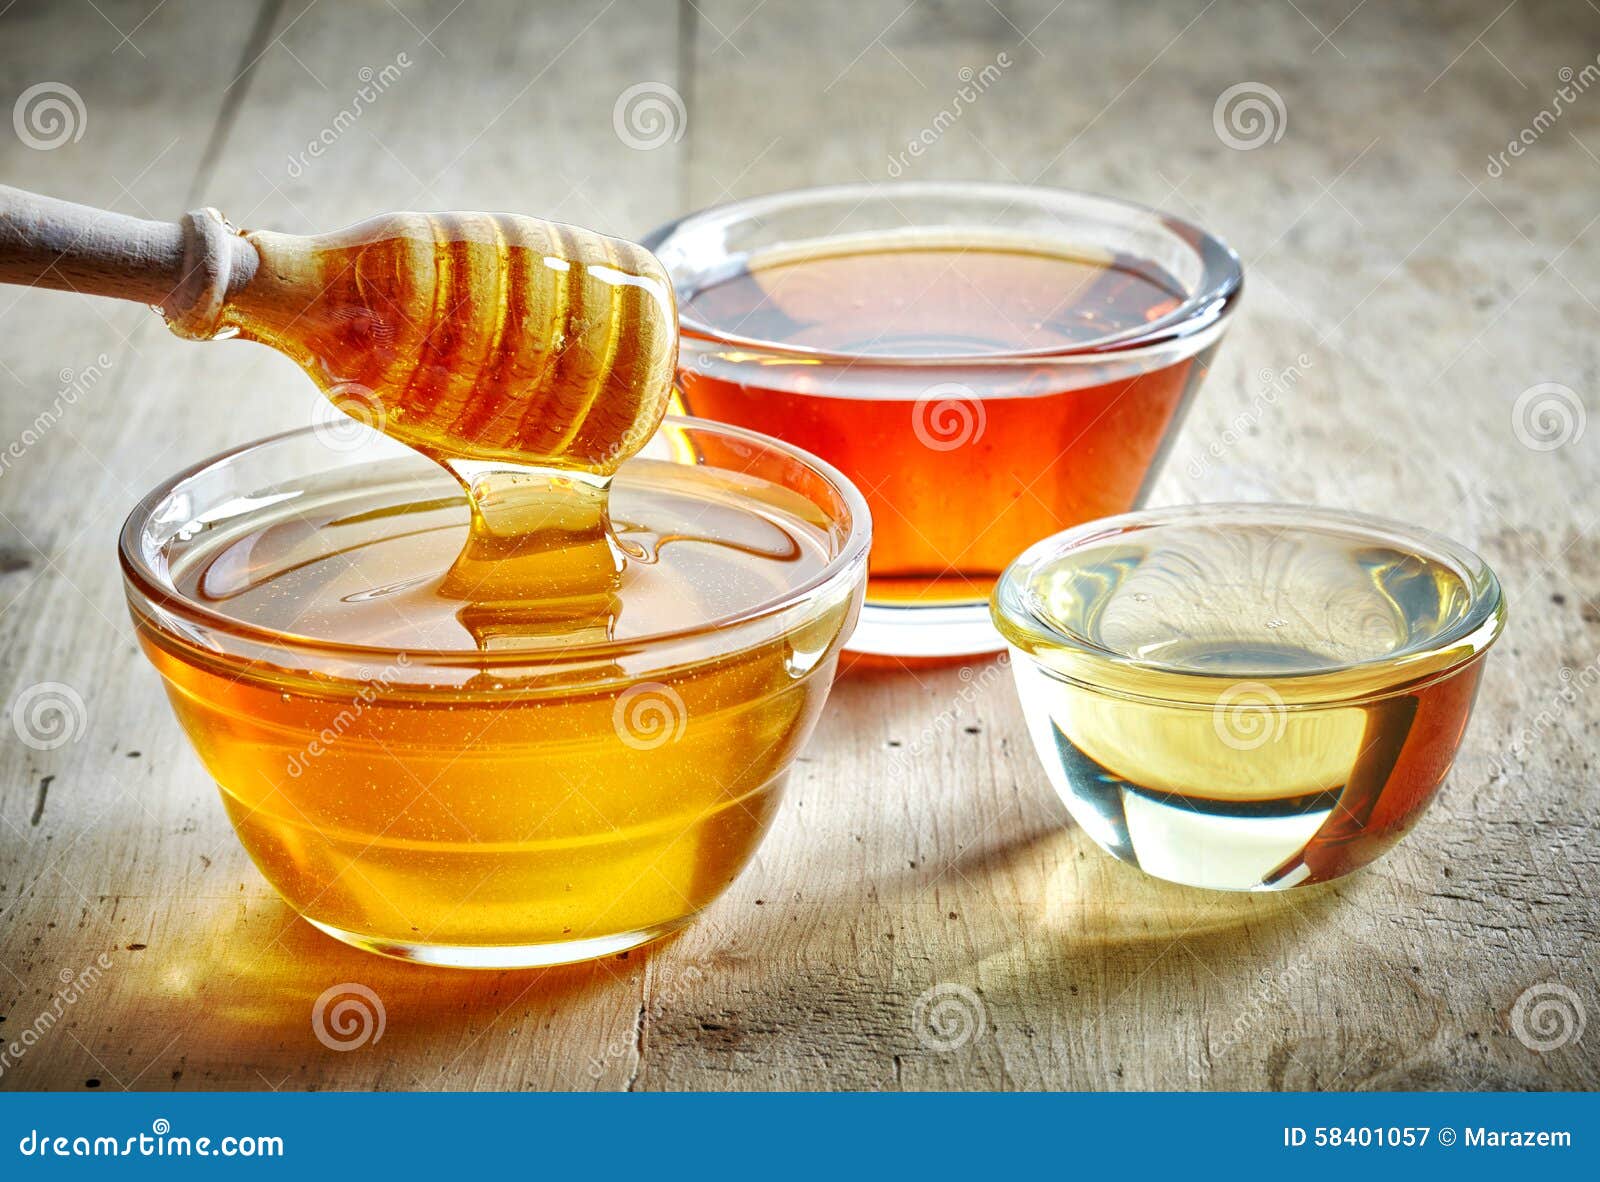 various kinds of honey